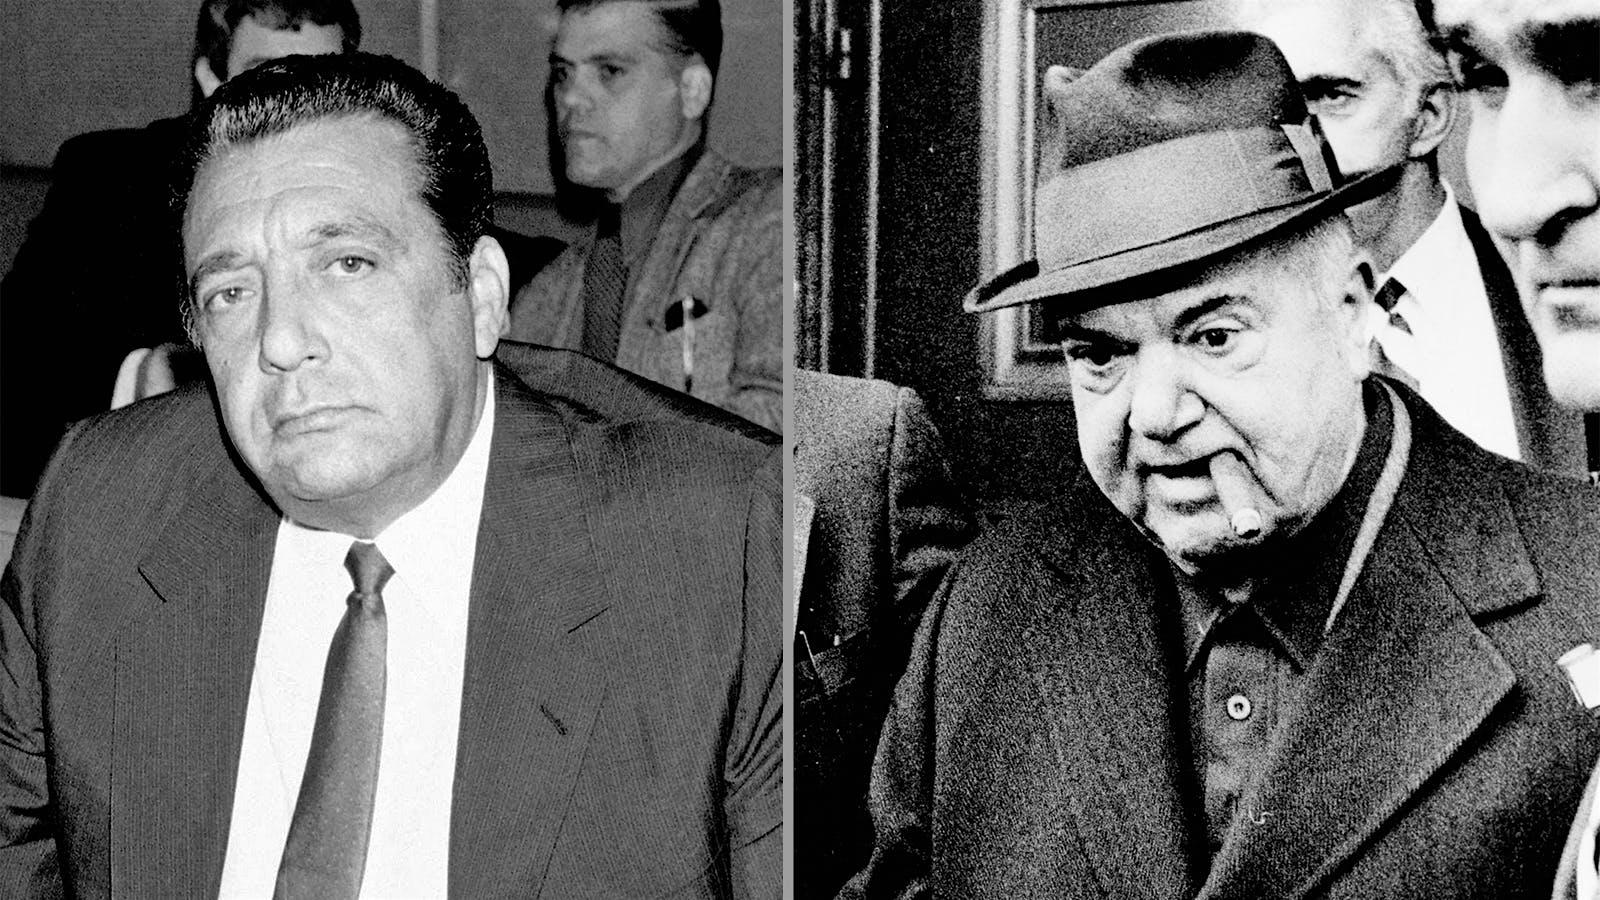 The Wine Collection of Mobster John Gotti Is For Sale at a NYC Shop